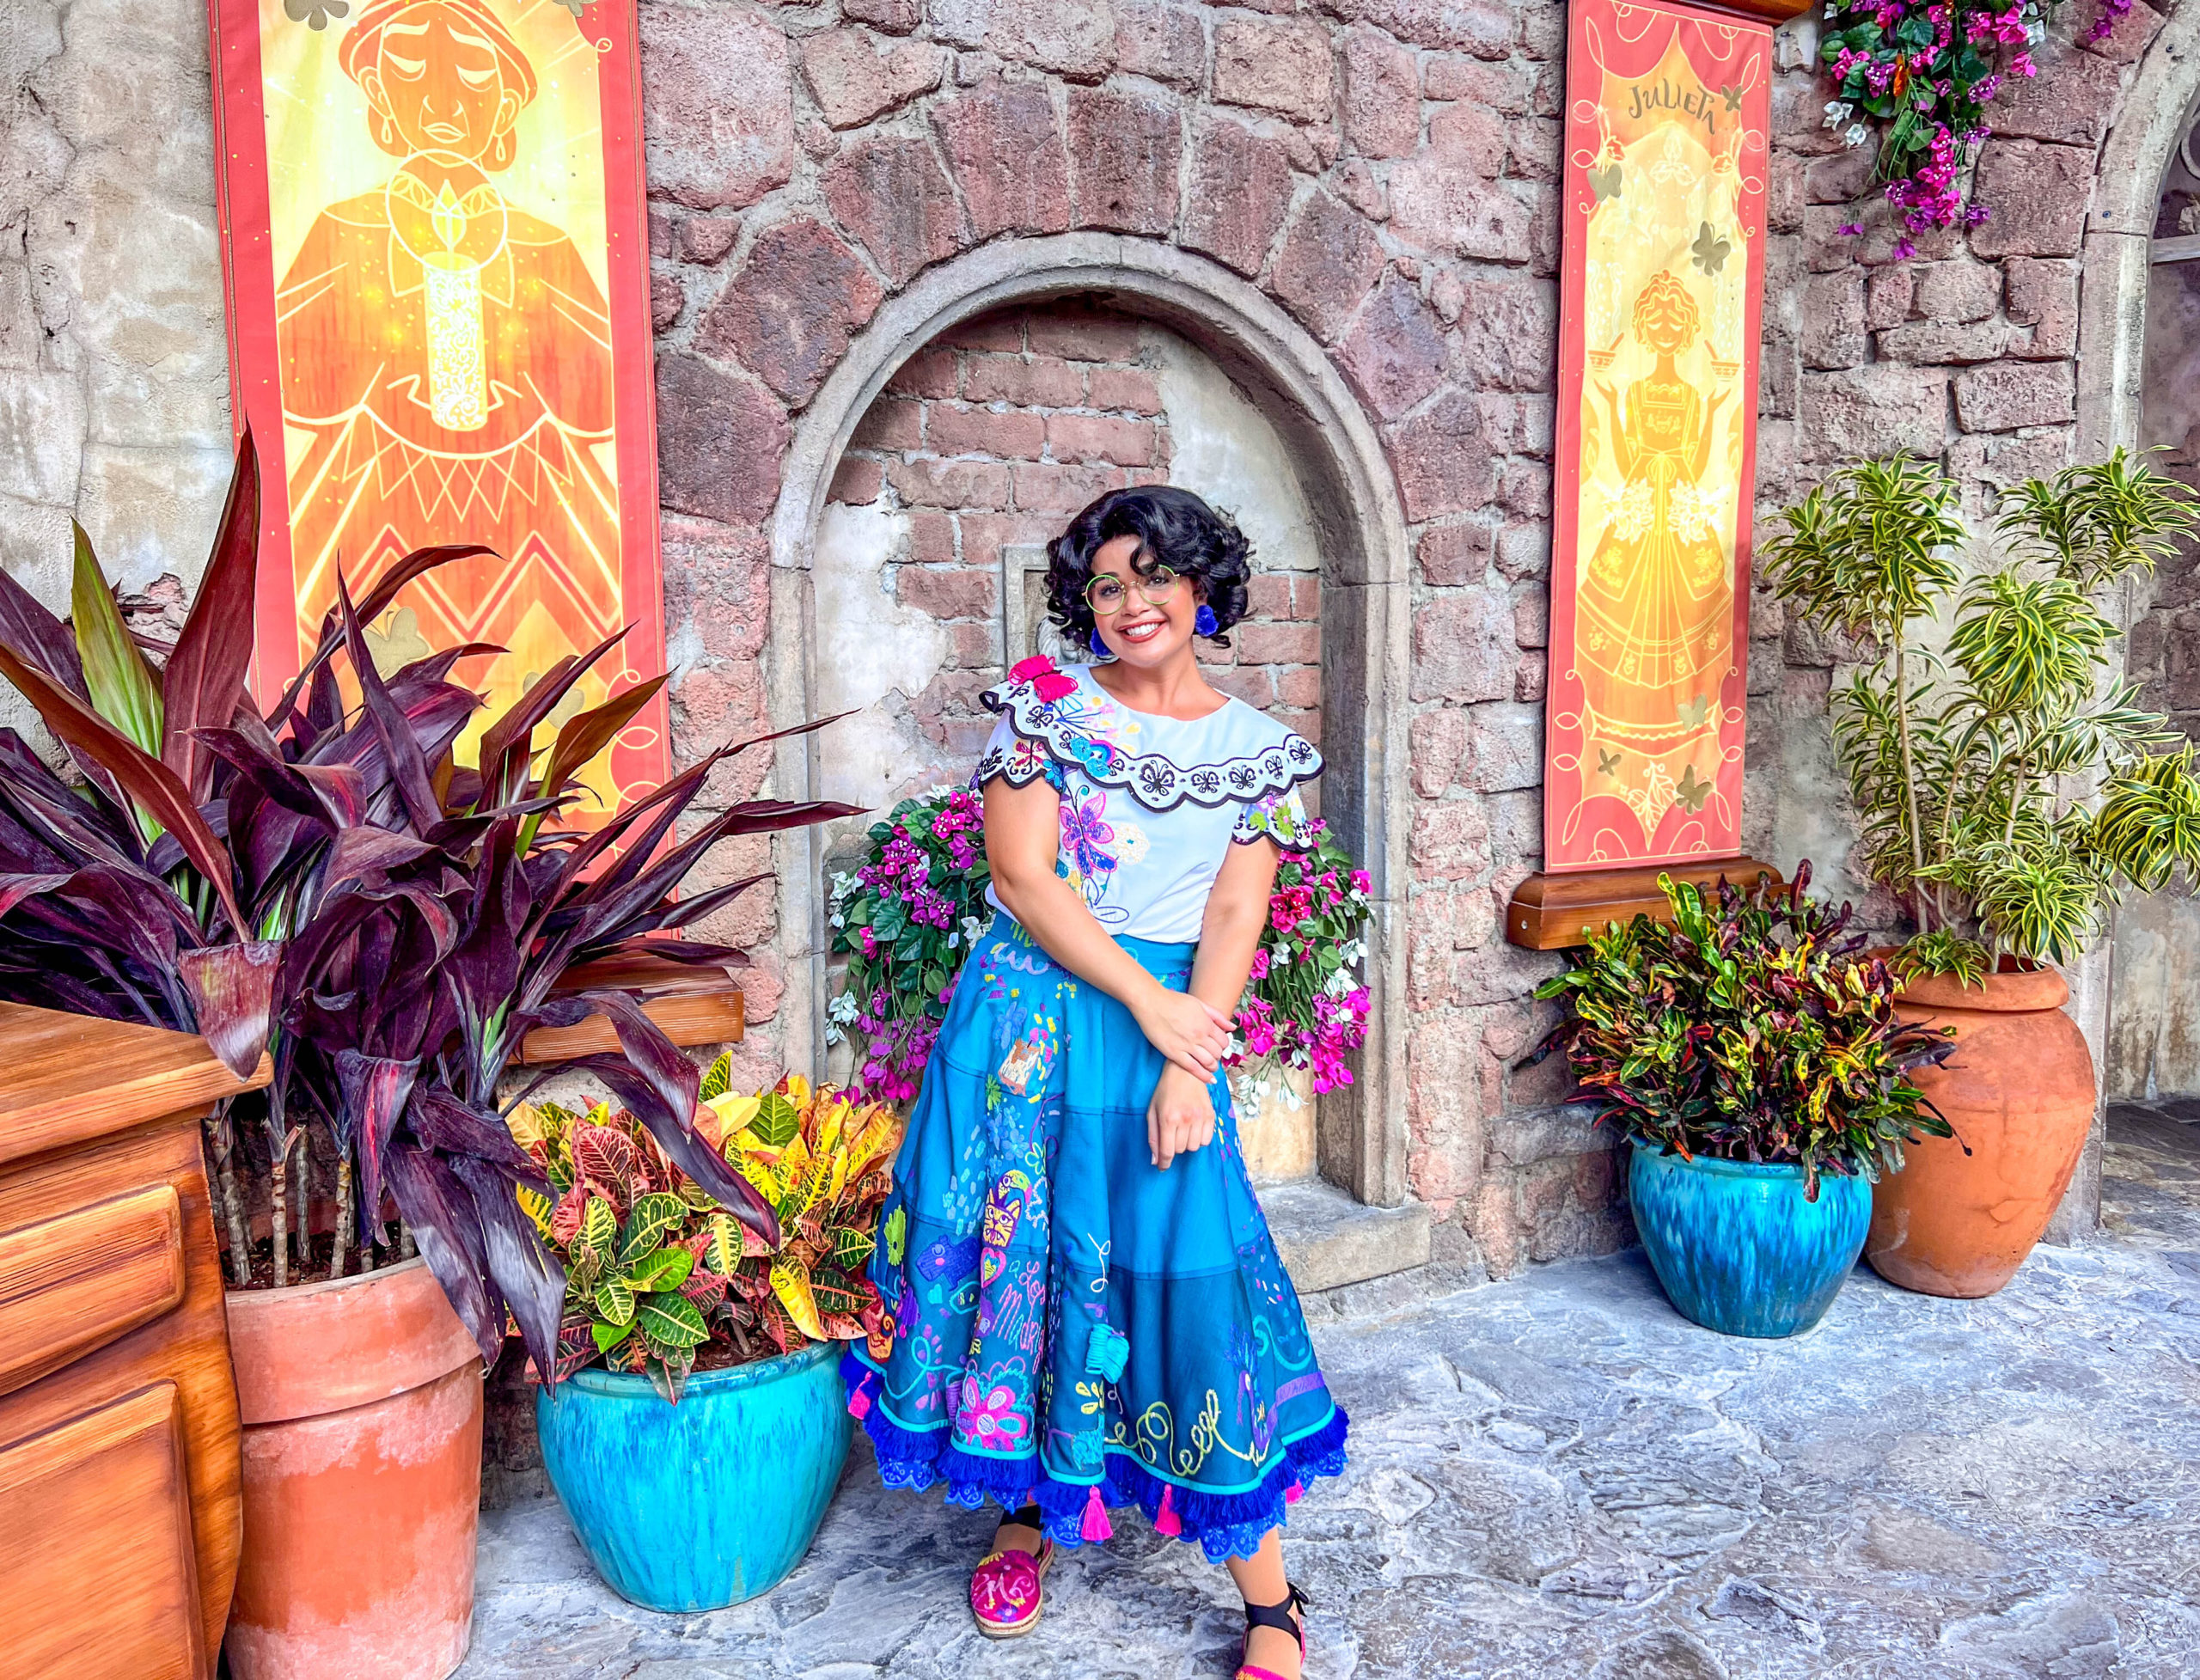 BREAKING: You Can Now Meet Mirabel From 'Encanto' at Disney World